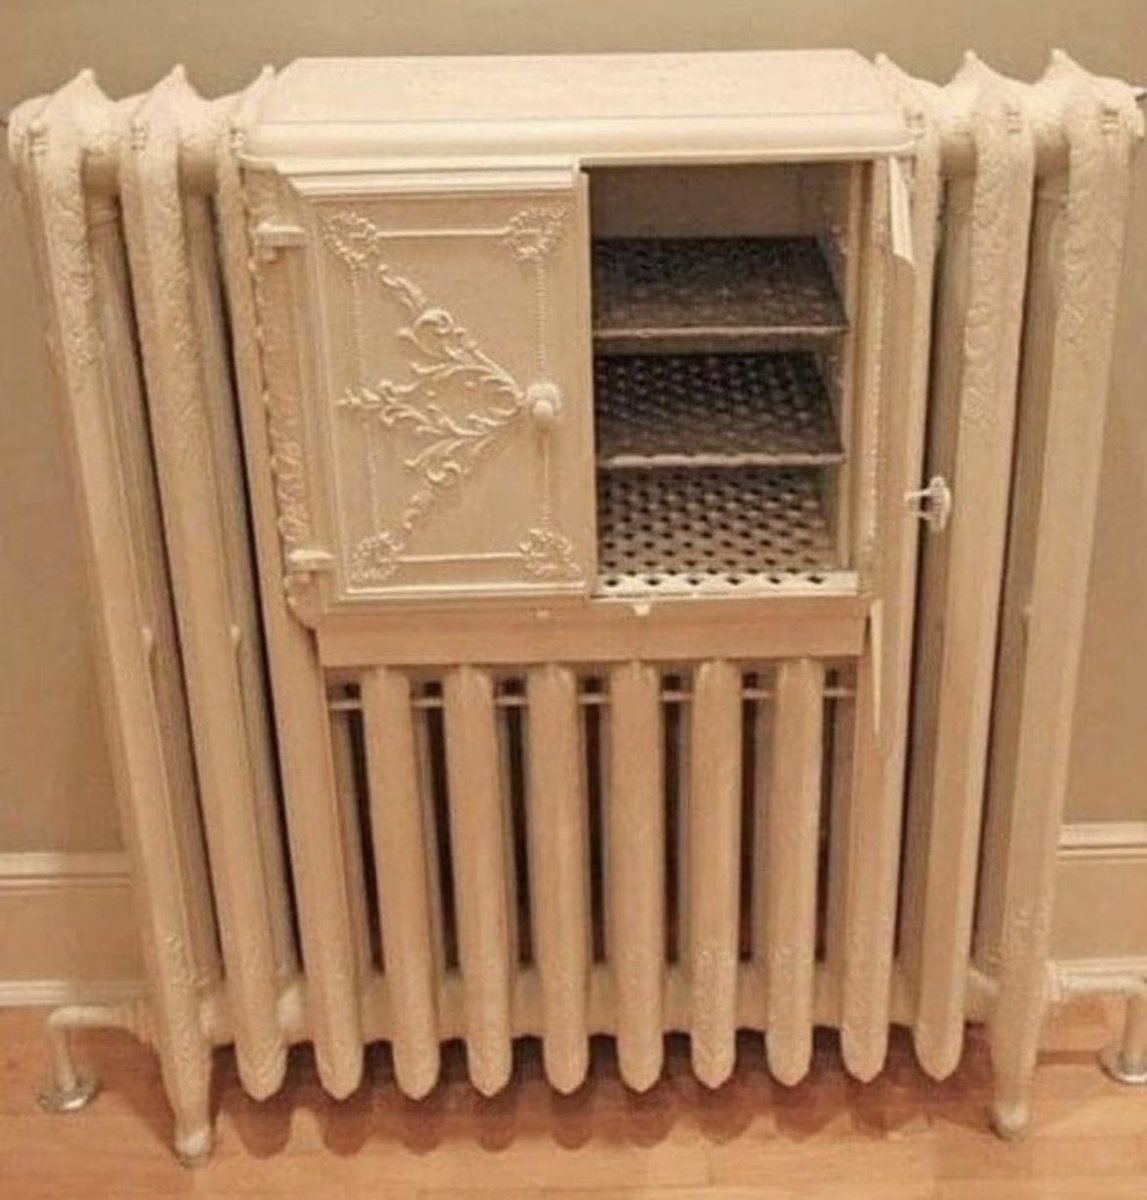 Victorian radiator with a built in bread warmer.